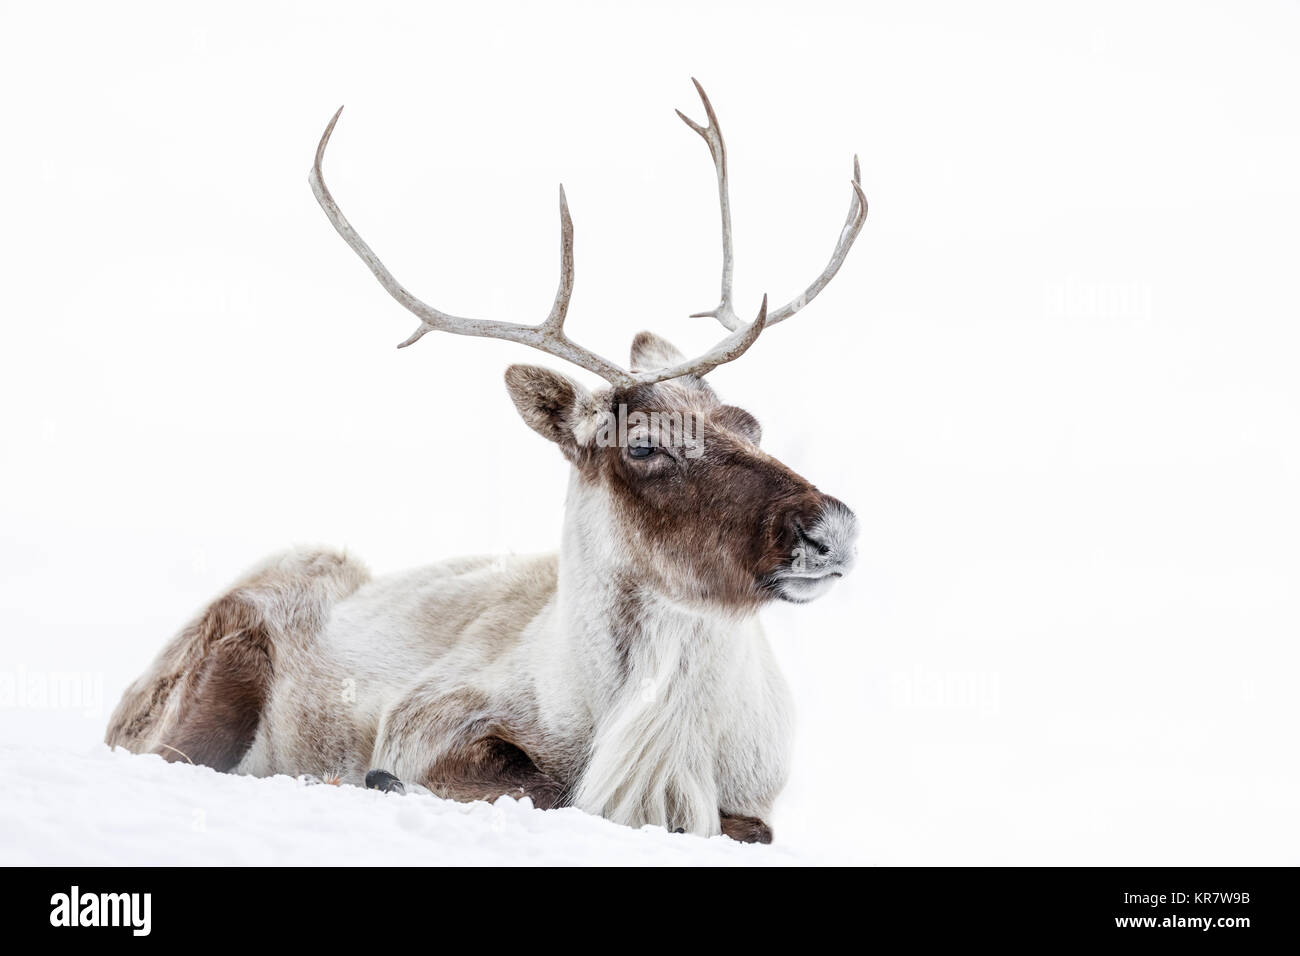 Reindeer, also known as the Boreal Woodland Caribou in North America, Rangifer tarandus, Manitoba, Canada. Stock Photo